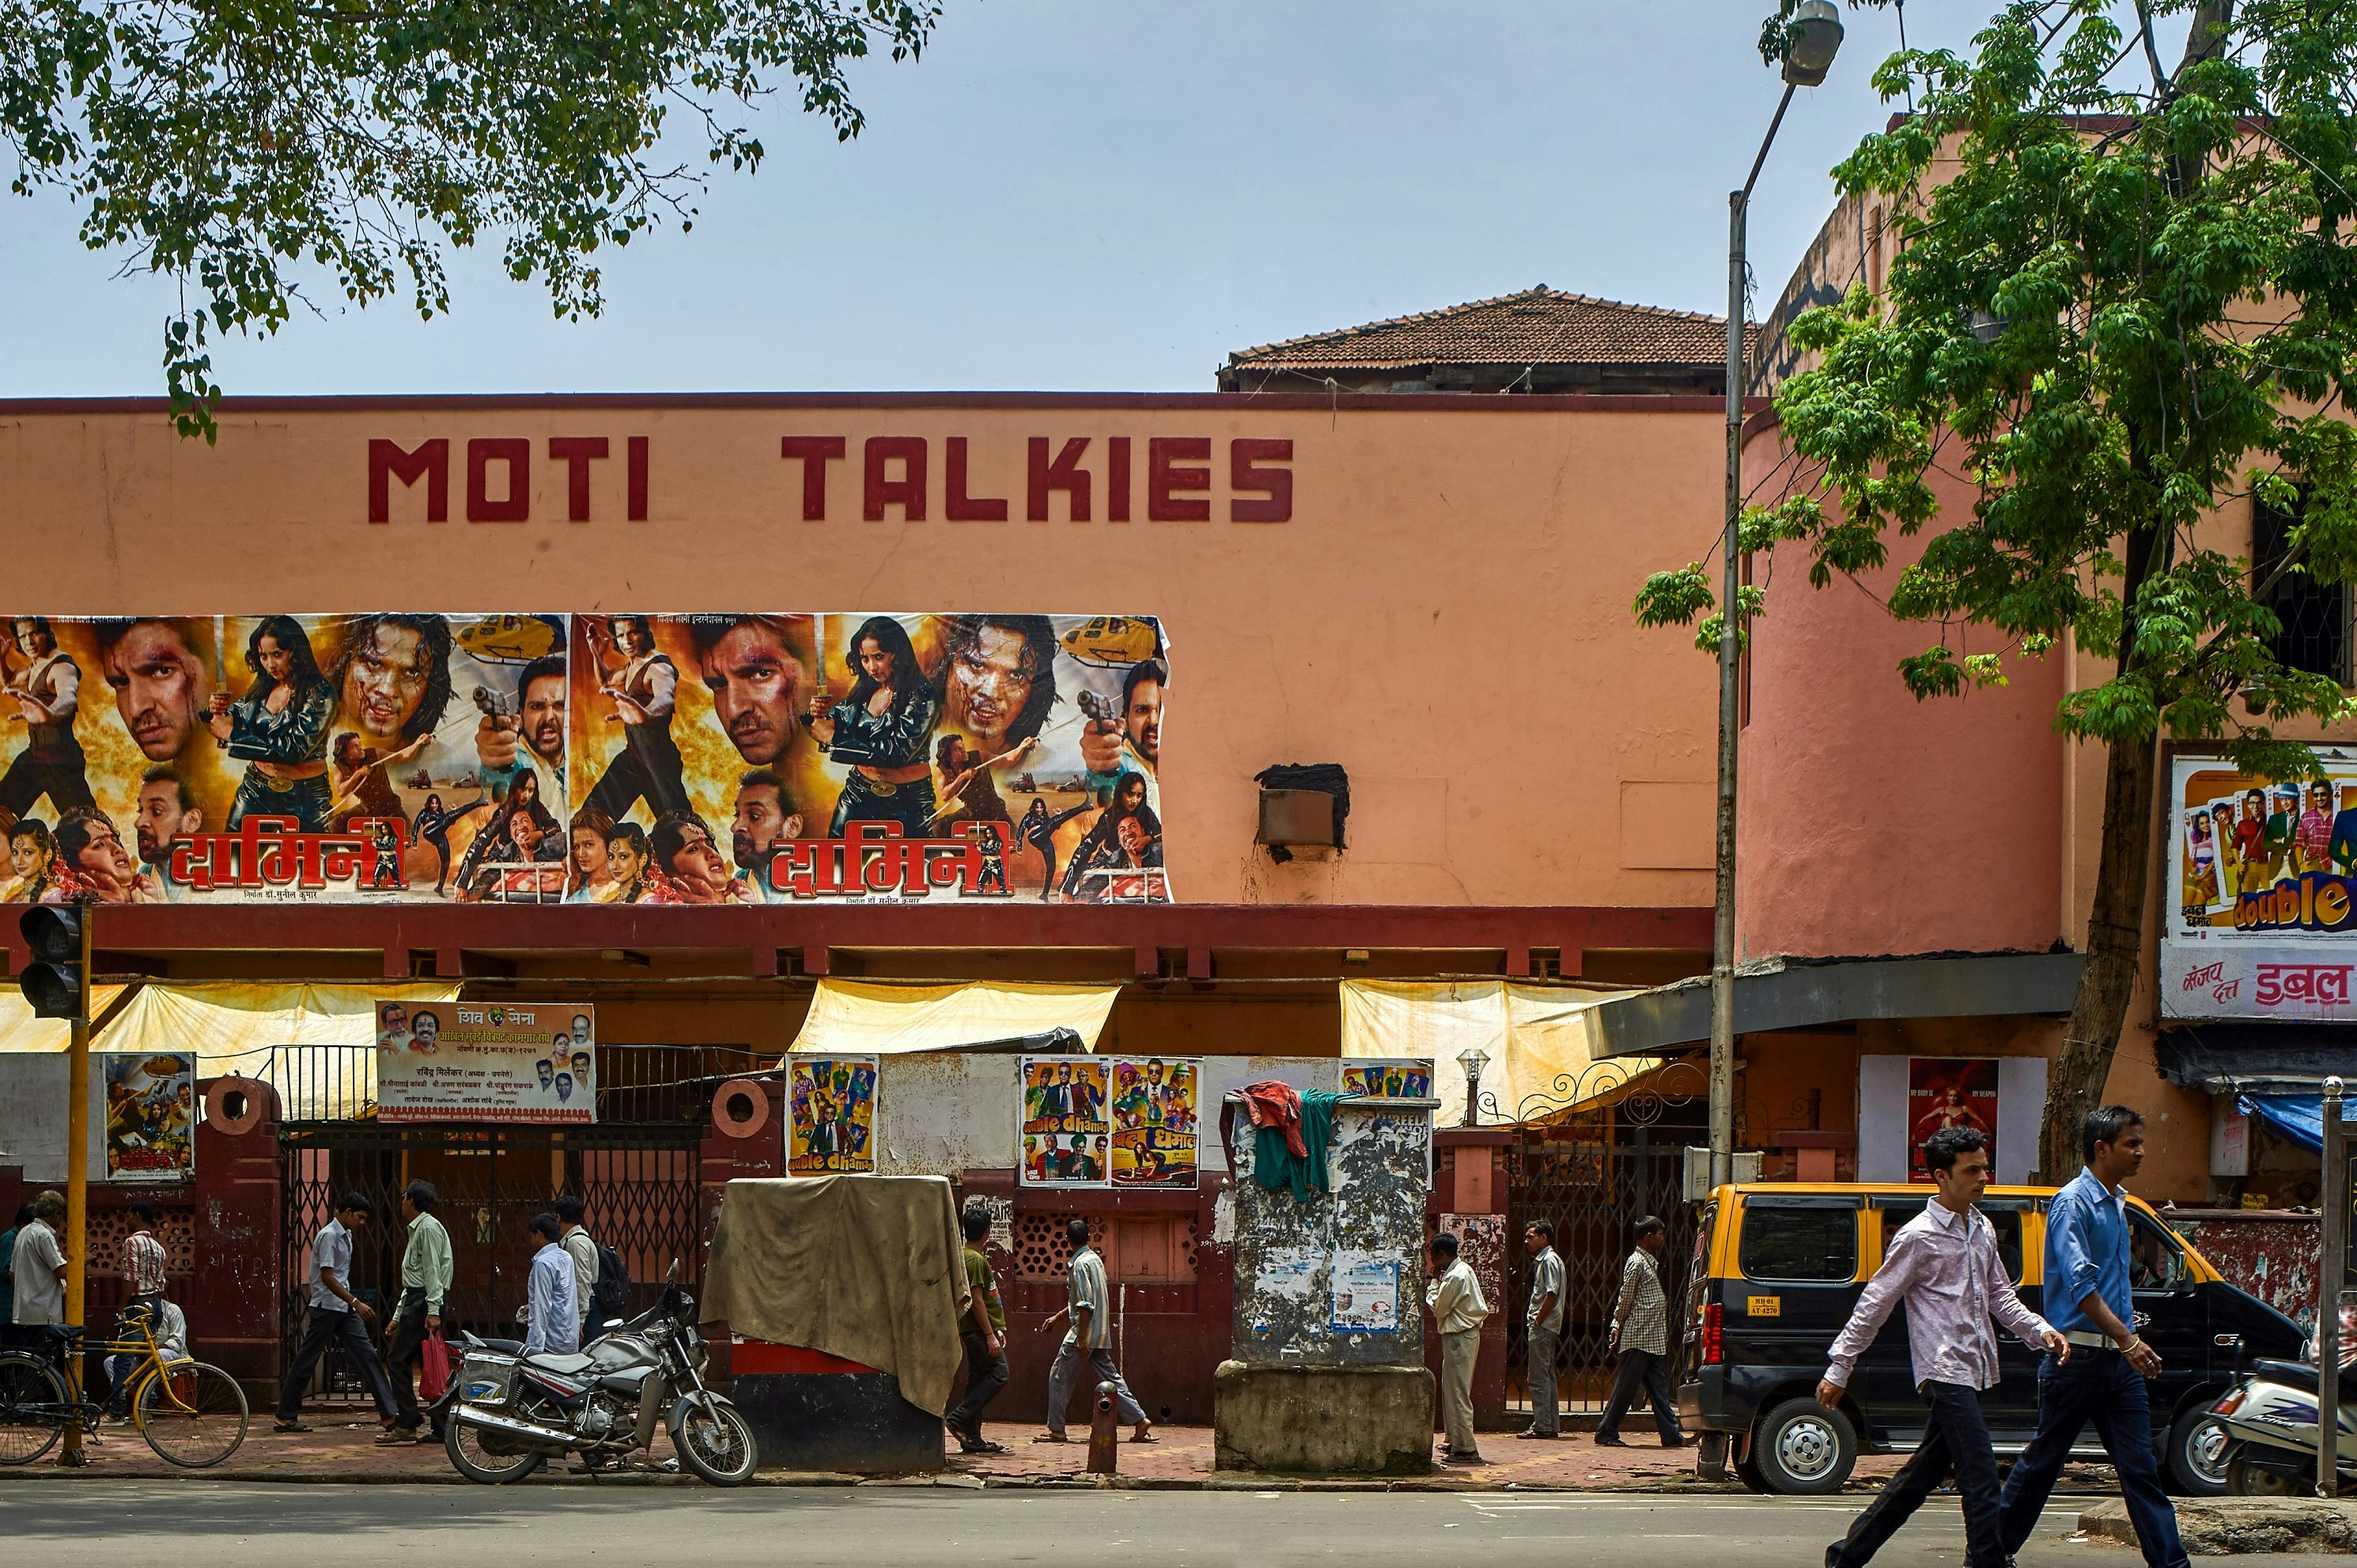 The exterior of the Moti Talkies, one of many cinemas in Mumbai. The building is large, and painted in a terracotta colour, with many people walking past in the street.